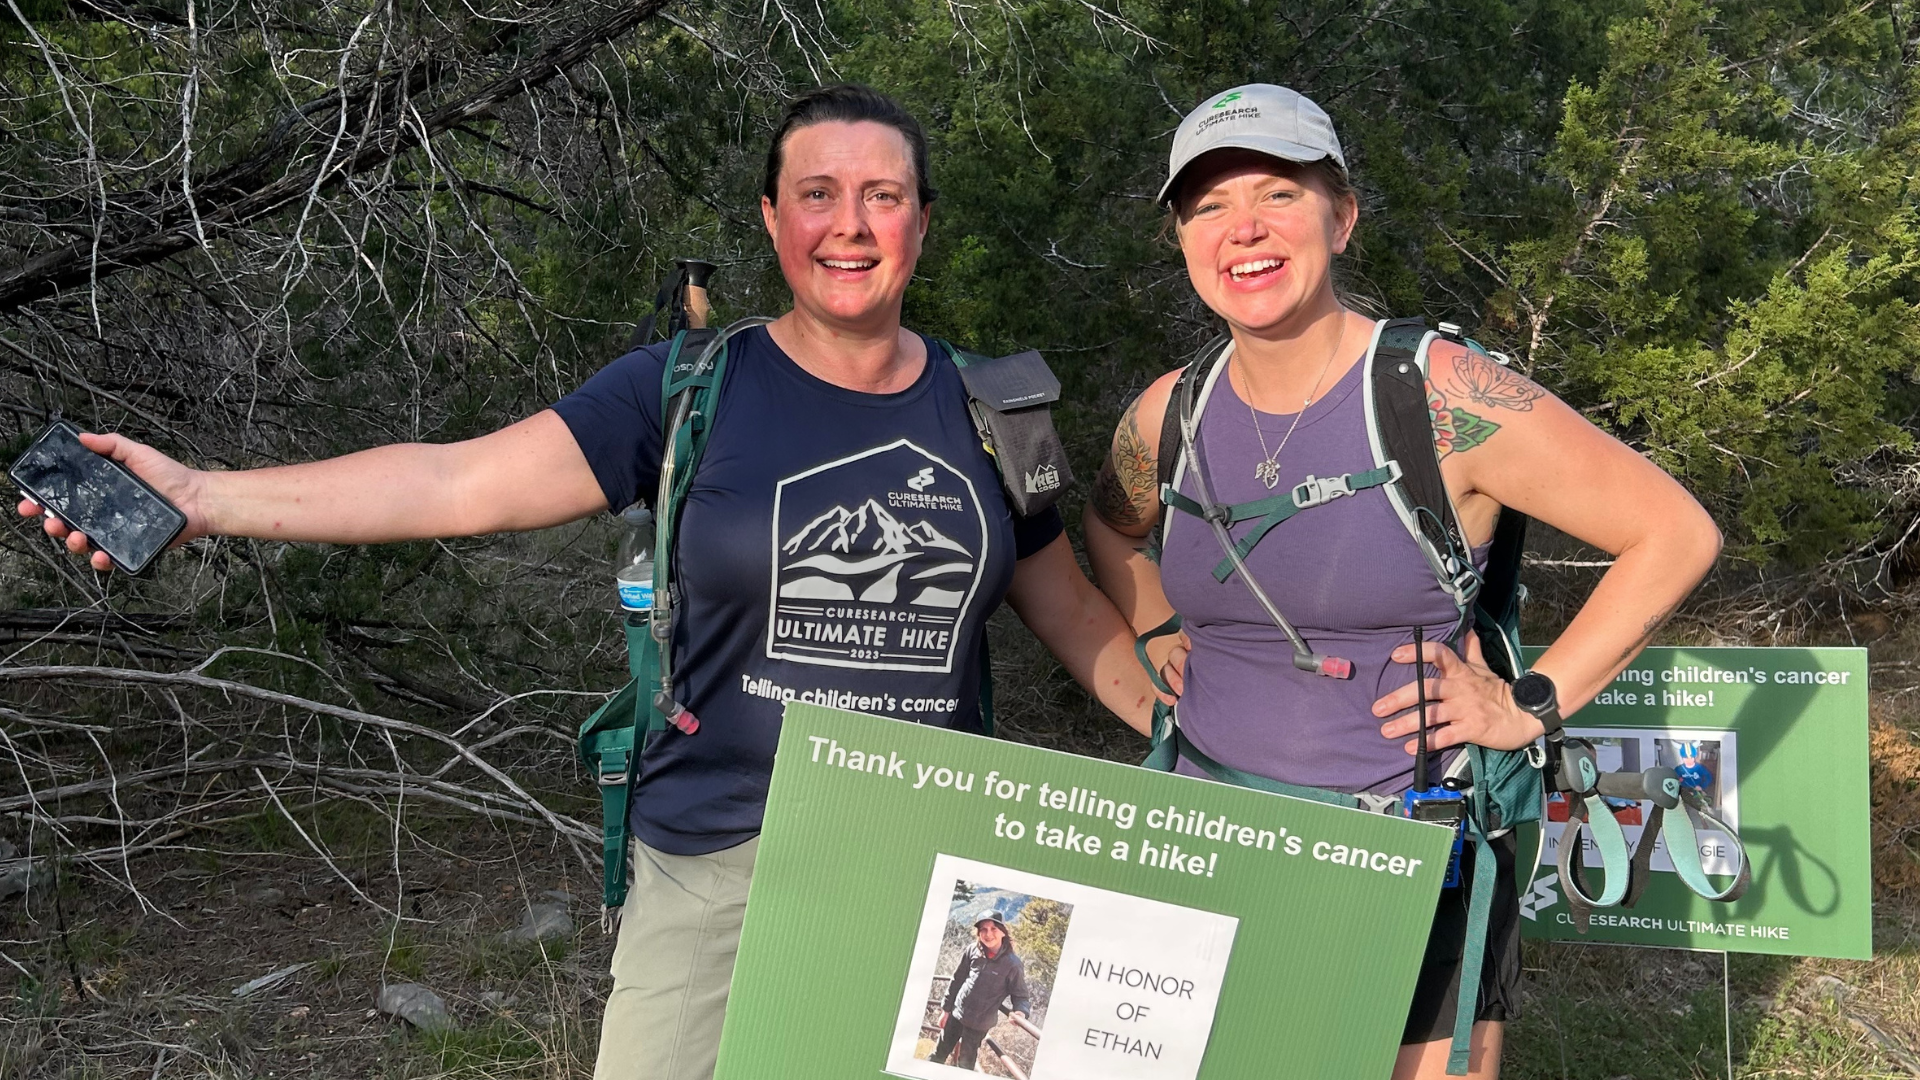 CureSearch Ultimate Hike is the only hiking endurance program focused on children's cancer.